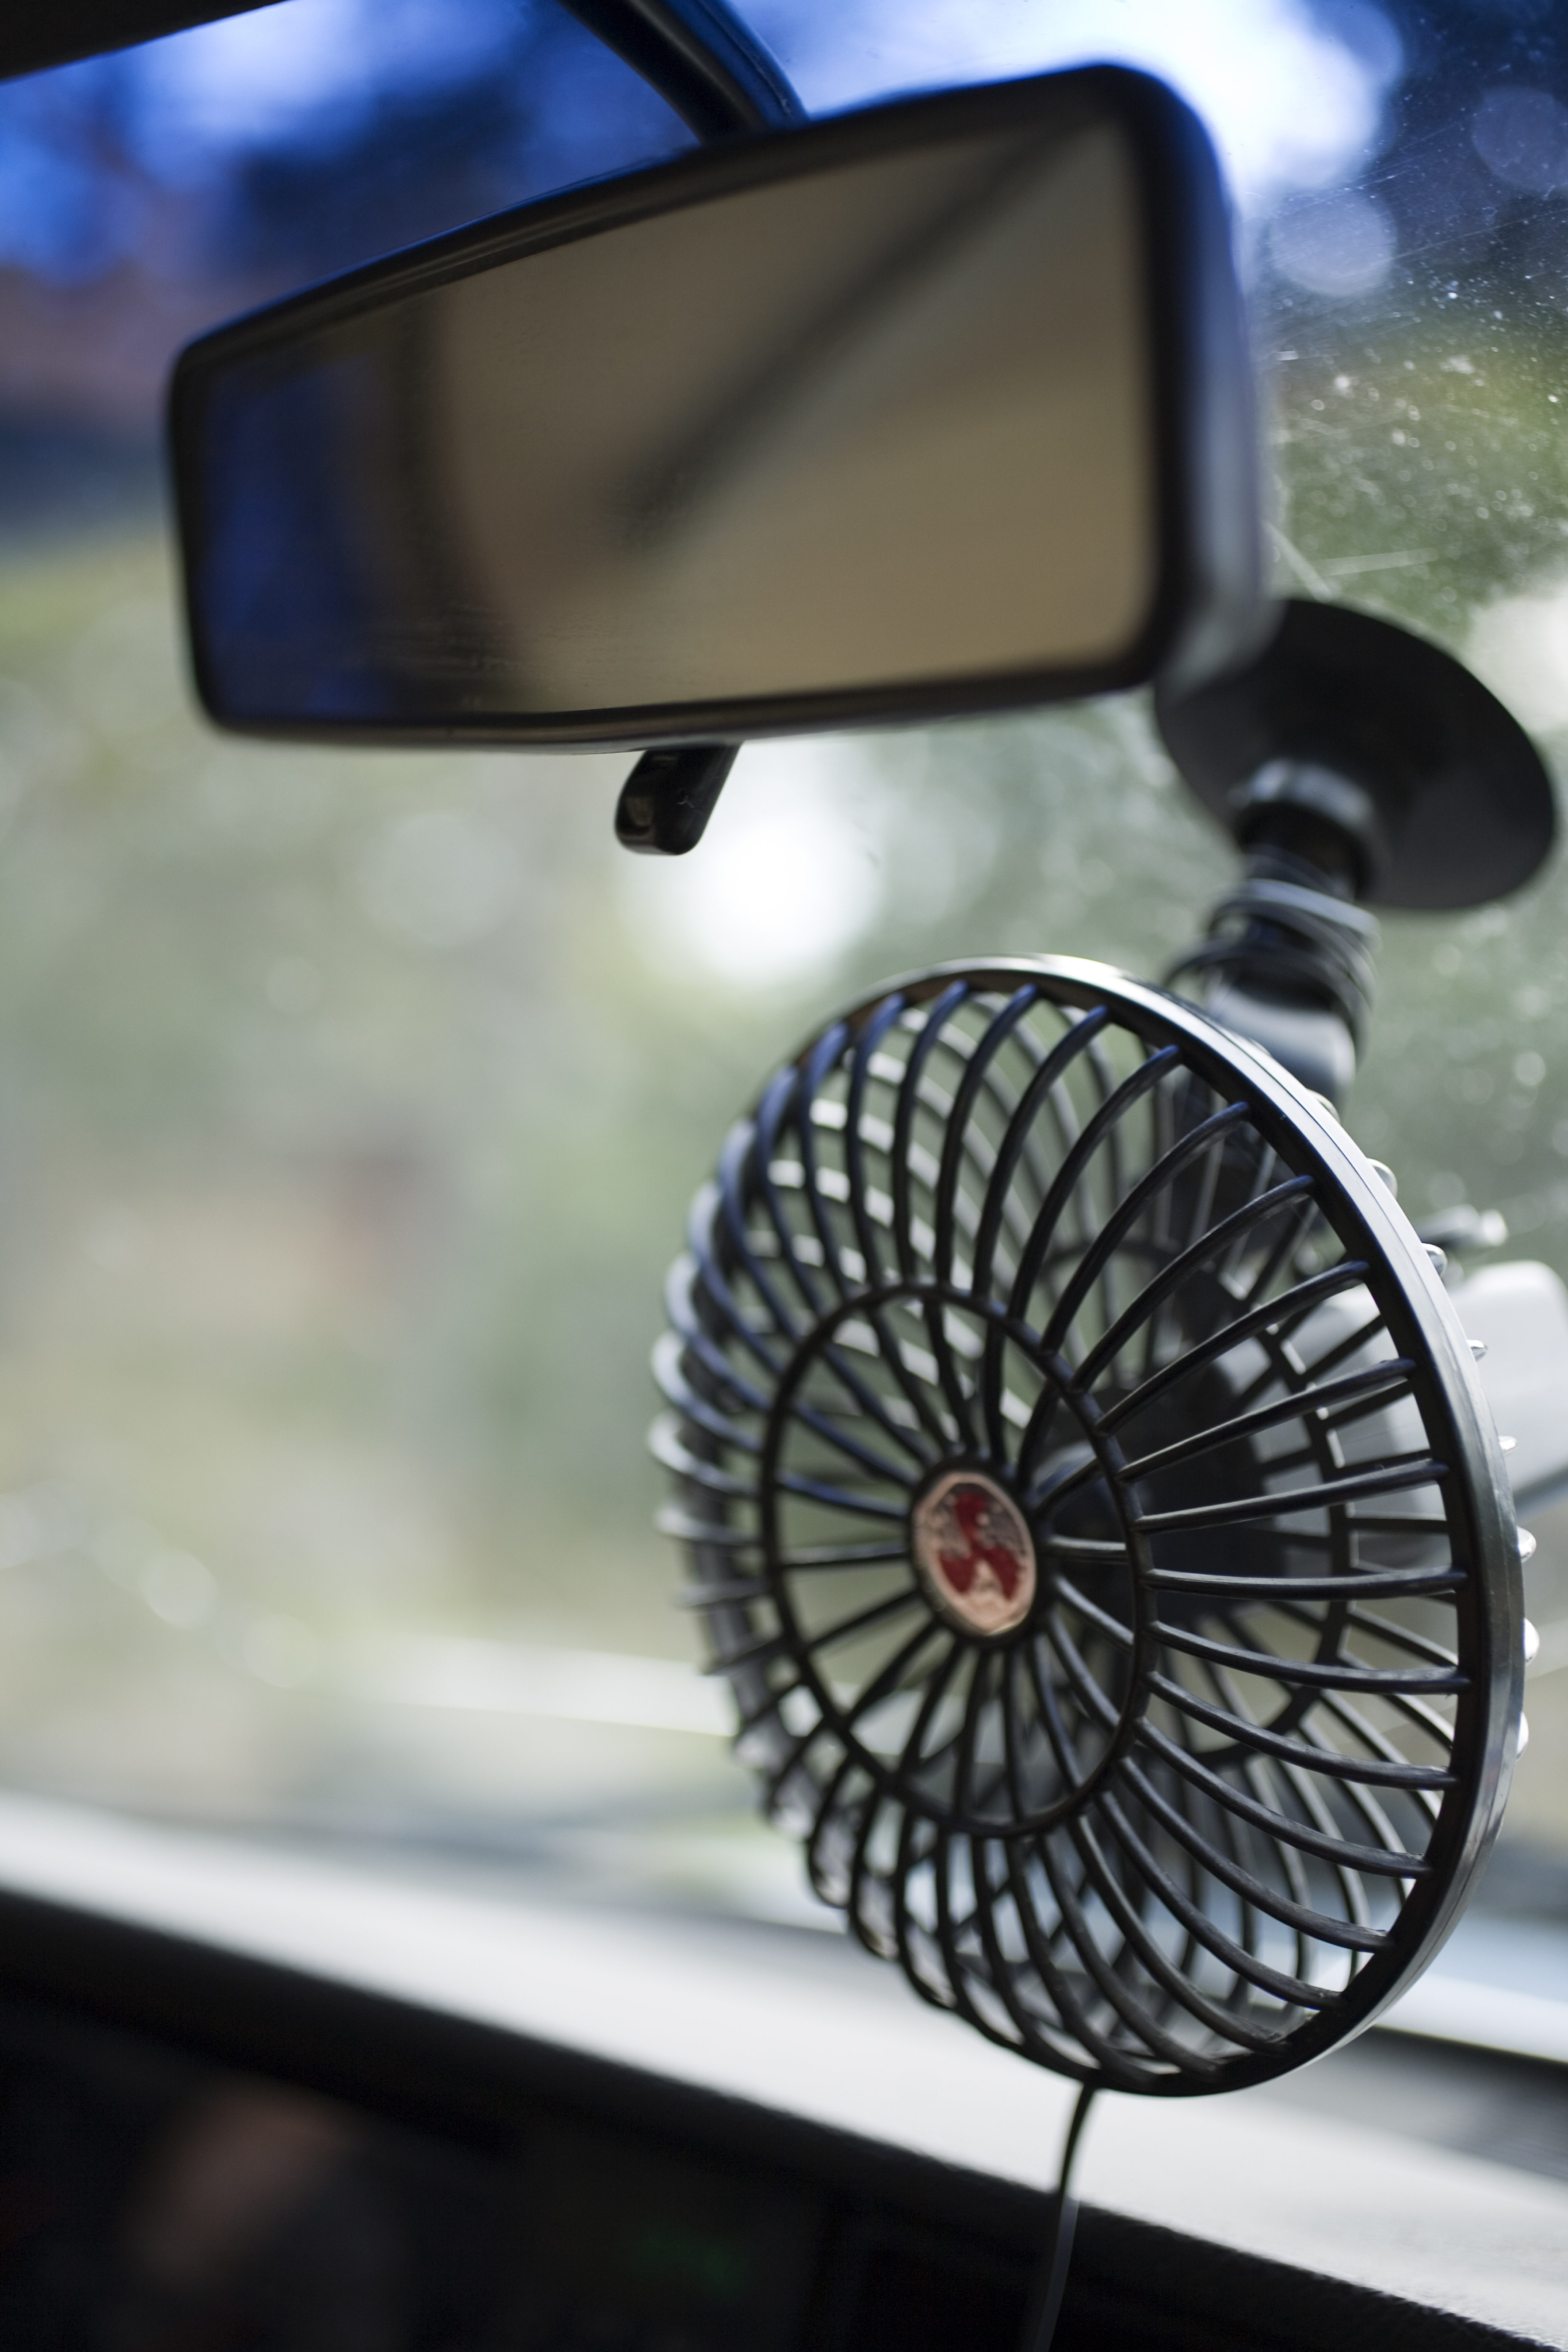 The suction tabs on the back of the fan allow it to be stuck almost anywhere in the car